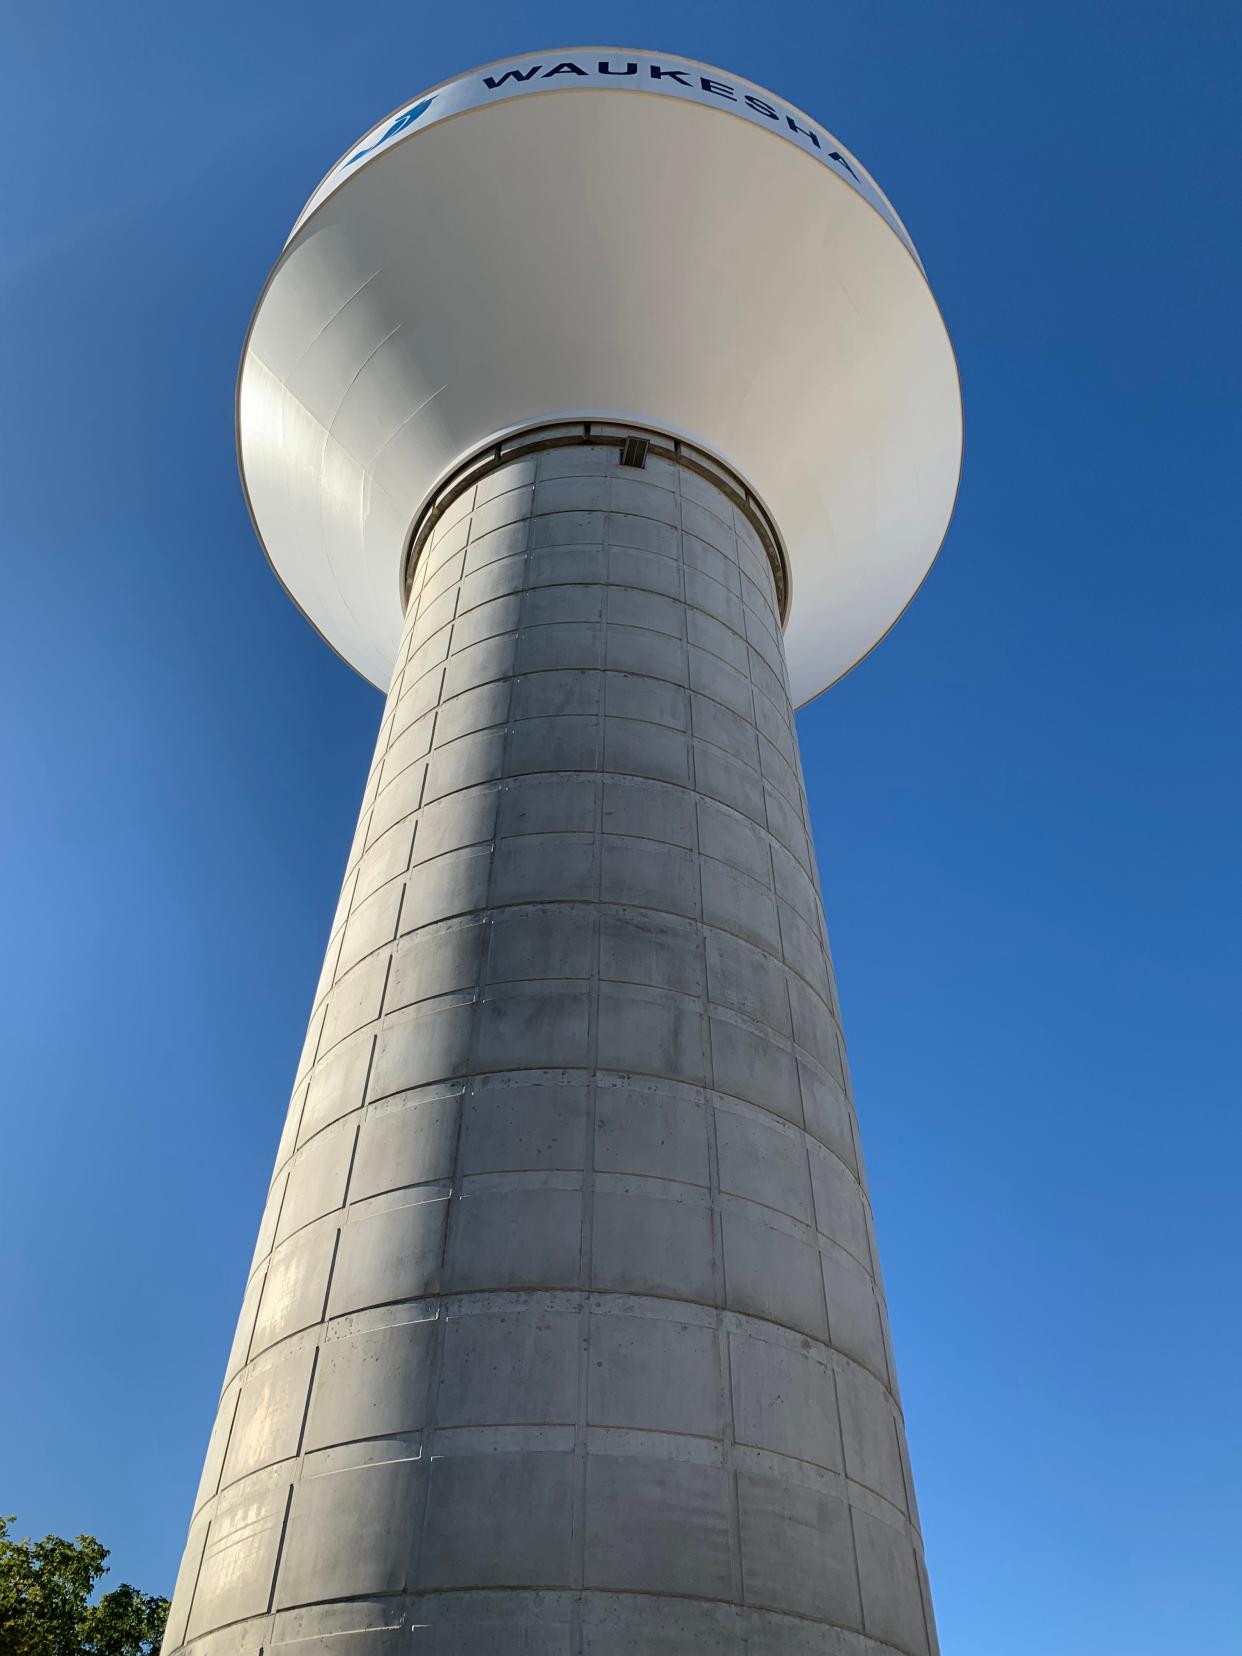 The water tower at the Waukesha Booster Pumping Station stands tall against a blue sky just days before the transition from groundwater to Lake Michigan water begins in September. Construction crews were completing last-minute site work on the pumping station on Aug. 30.